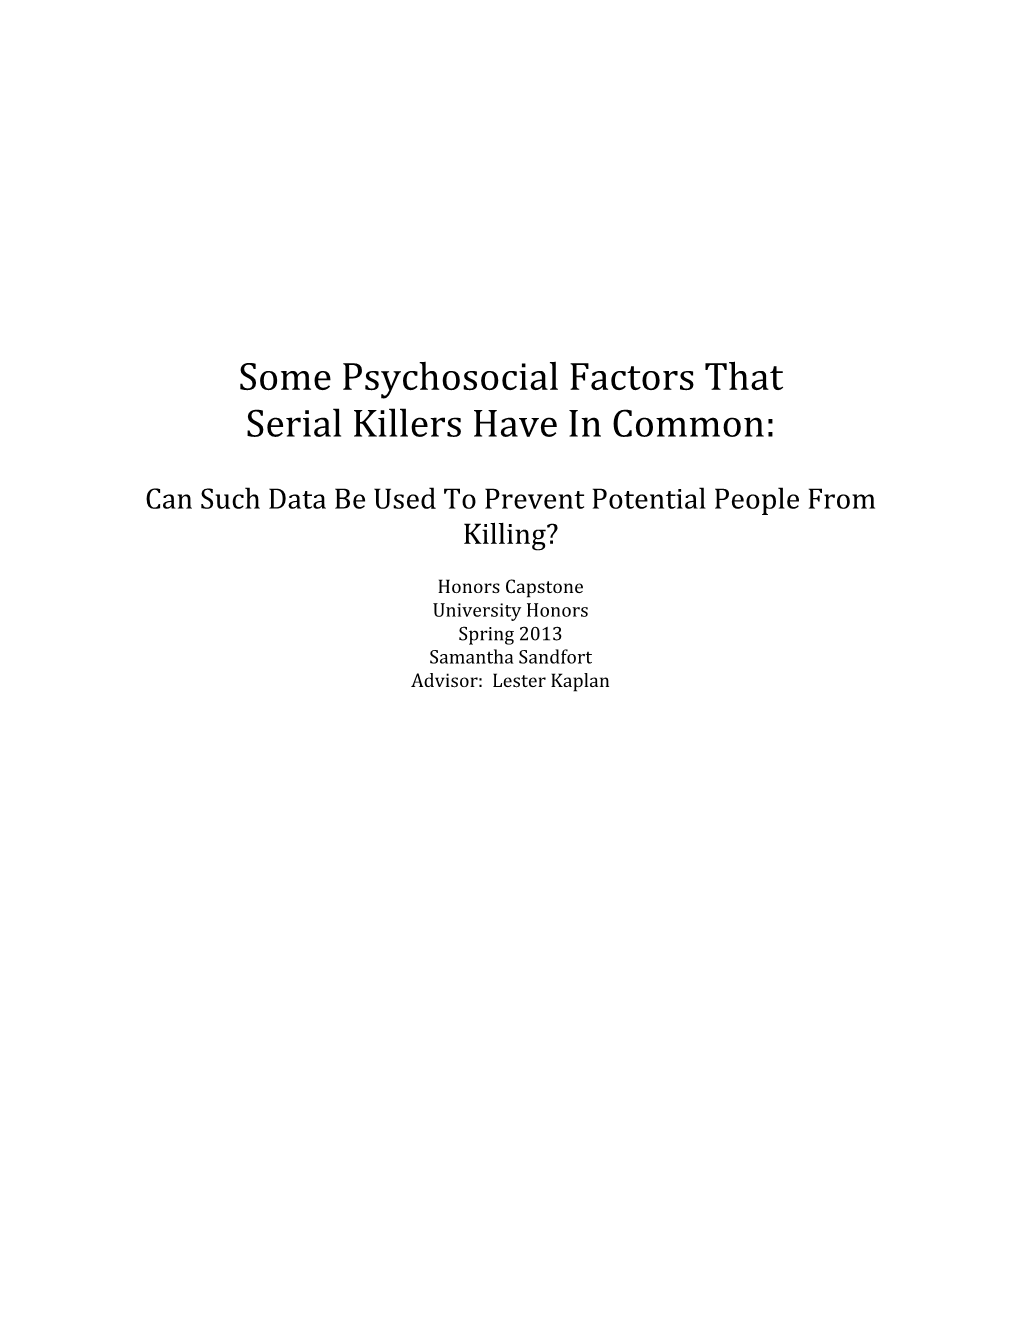 Some Psychosocial Factors That Serial Killers Have in Common